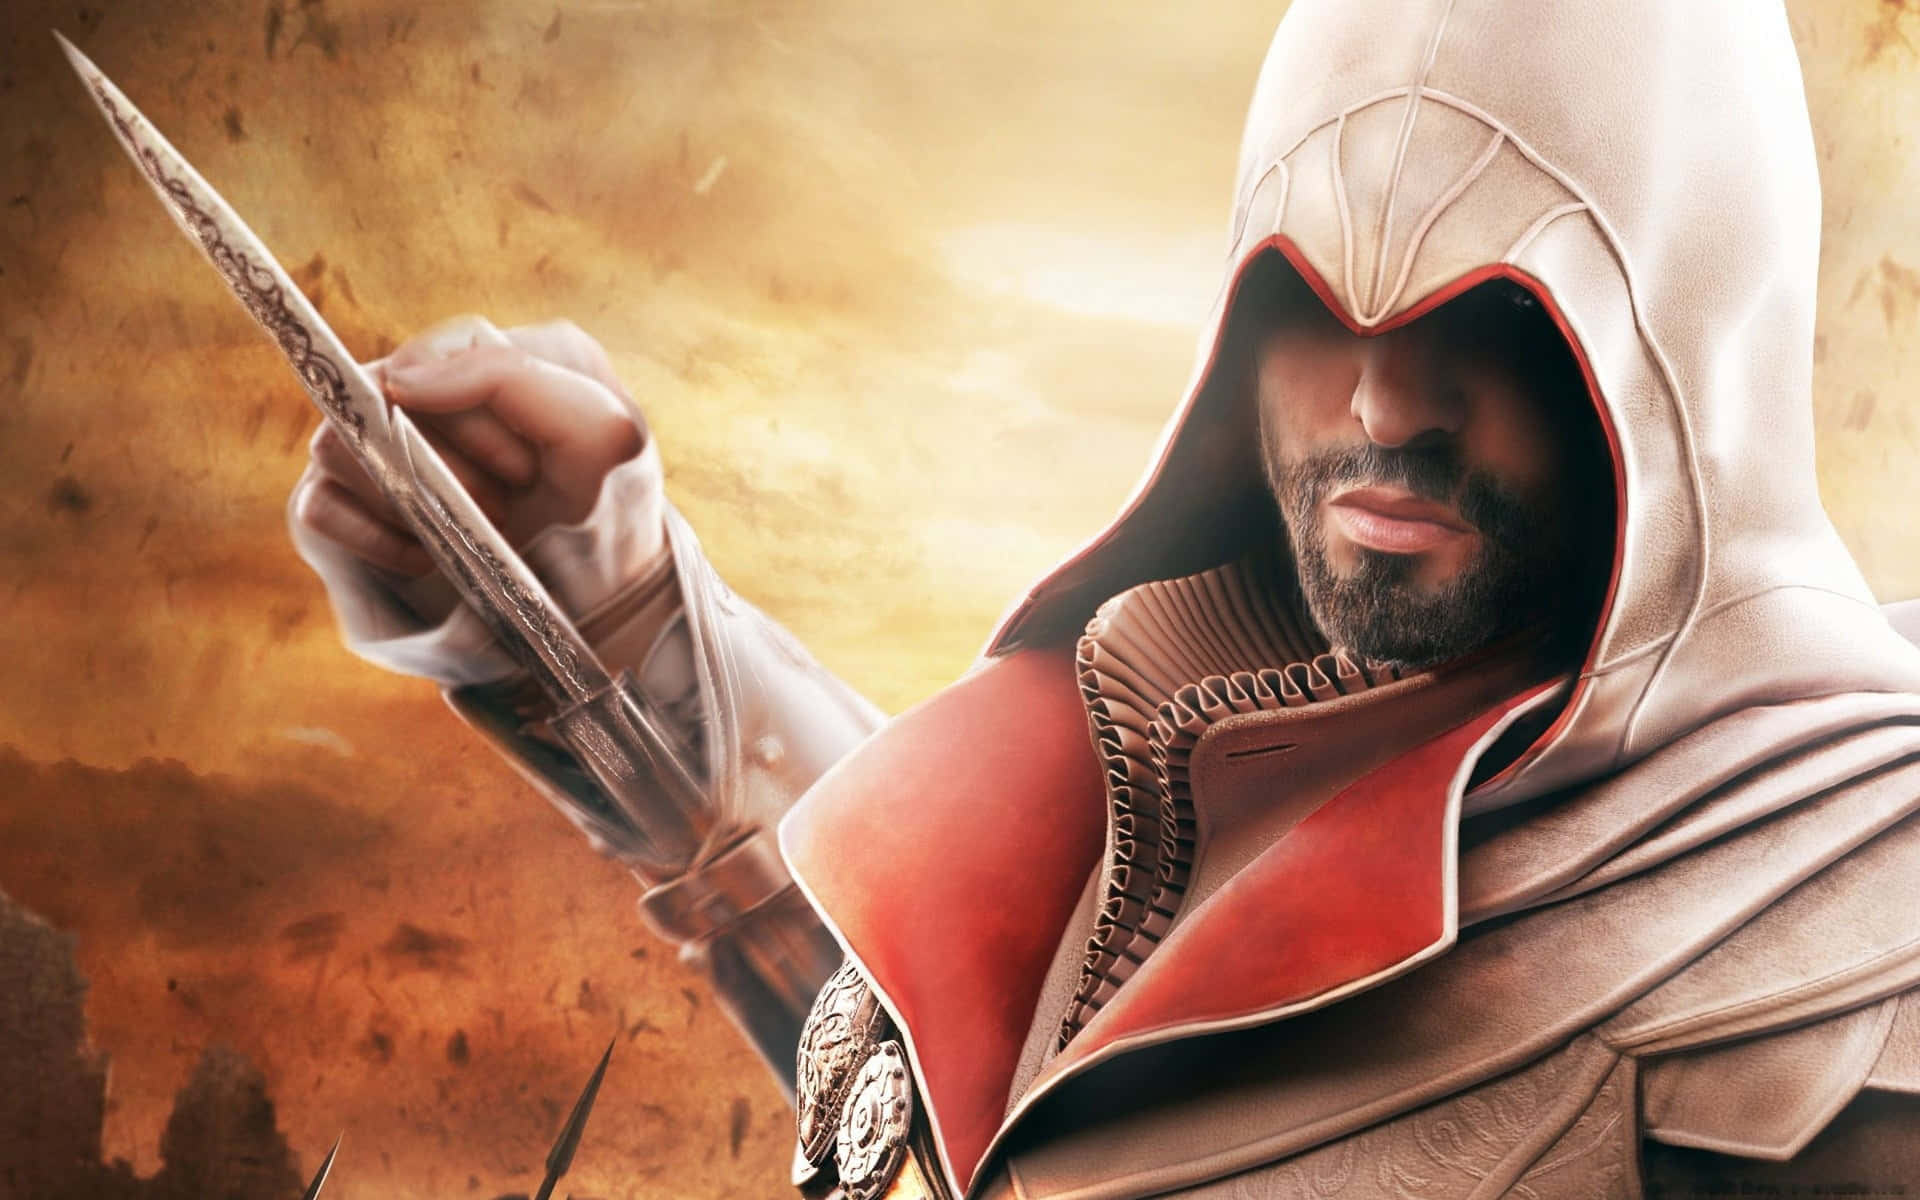 Altair, The Master Assassin in Assassin's Creed, Perched on a Rooftop Wallpaper